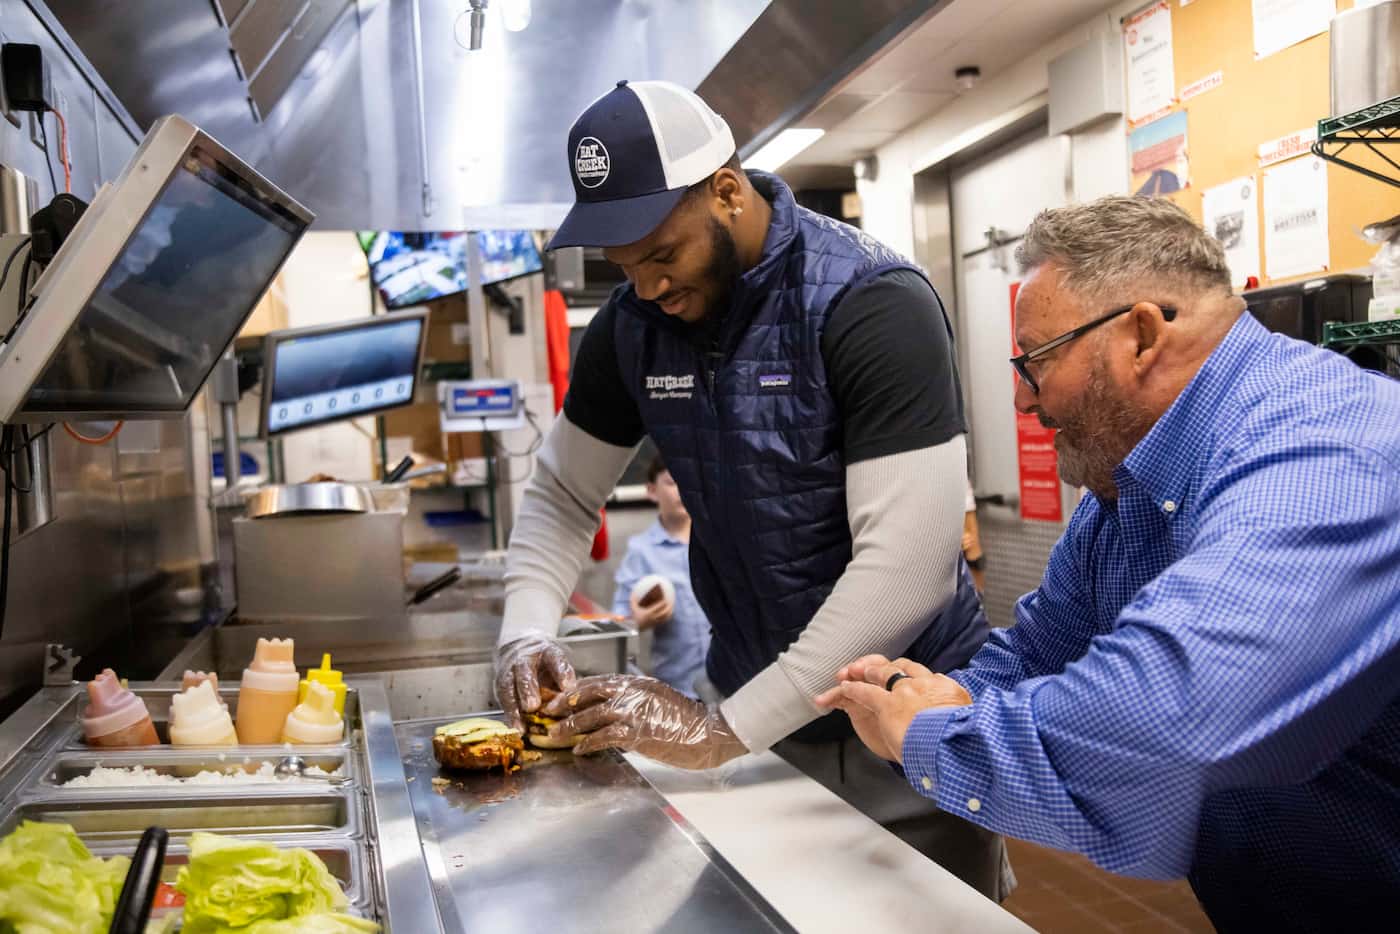 Robert Cooper, district manager for Hat Creek Burger Company, shows Dallas Cowboys...